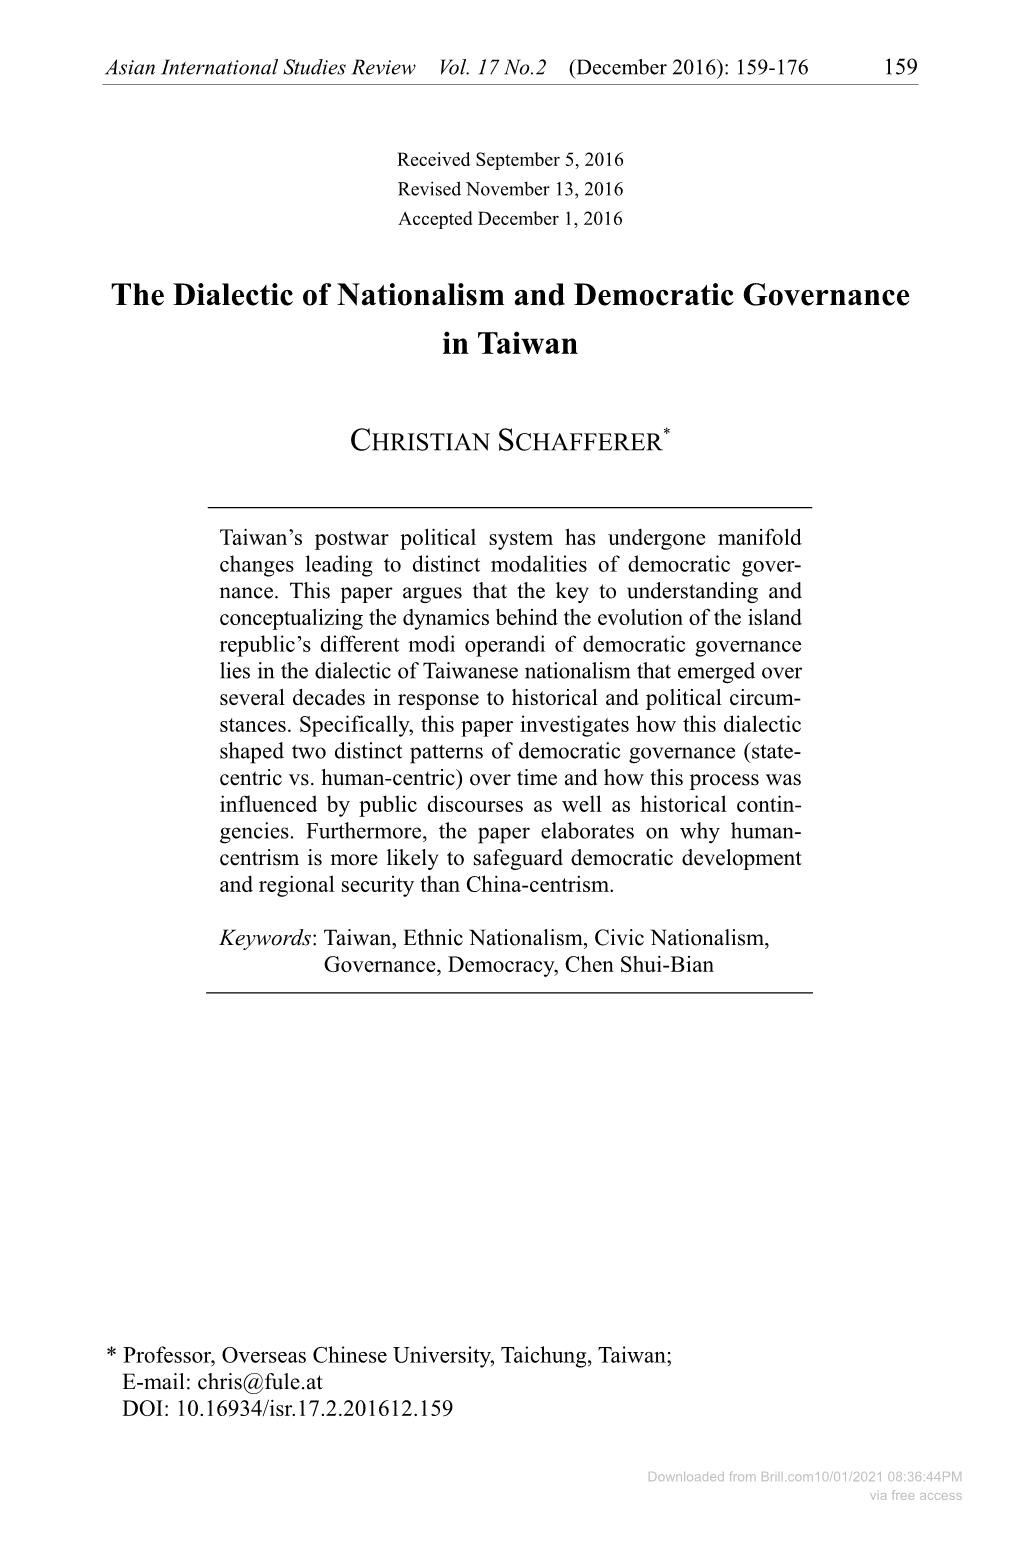 The Dialectic of Nationalism and Democratic Governance in Taiwan